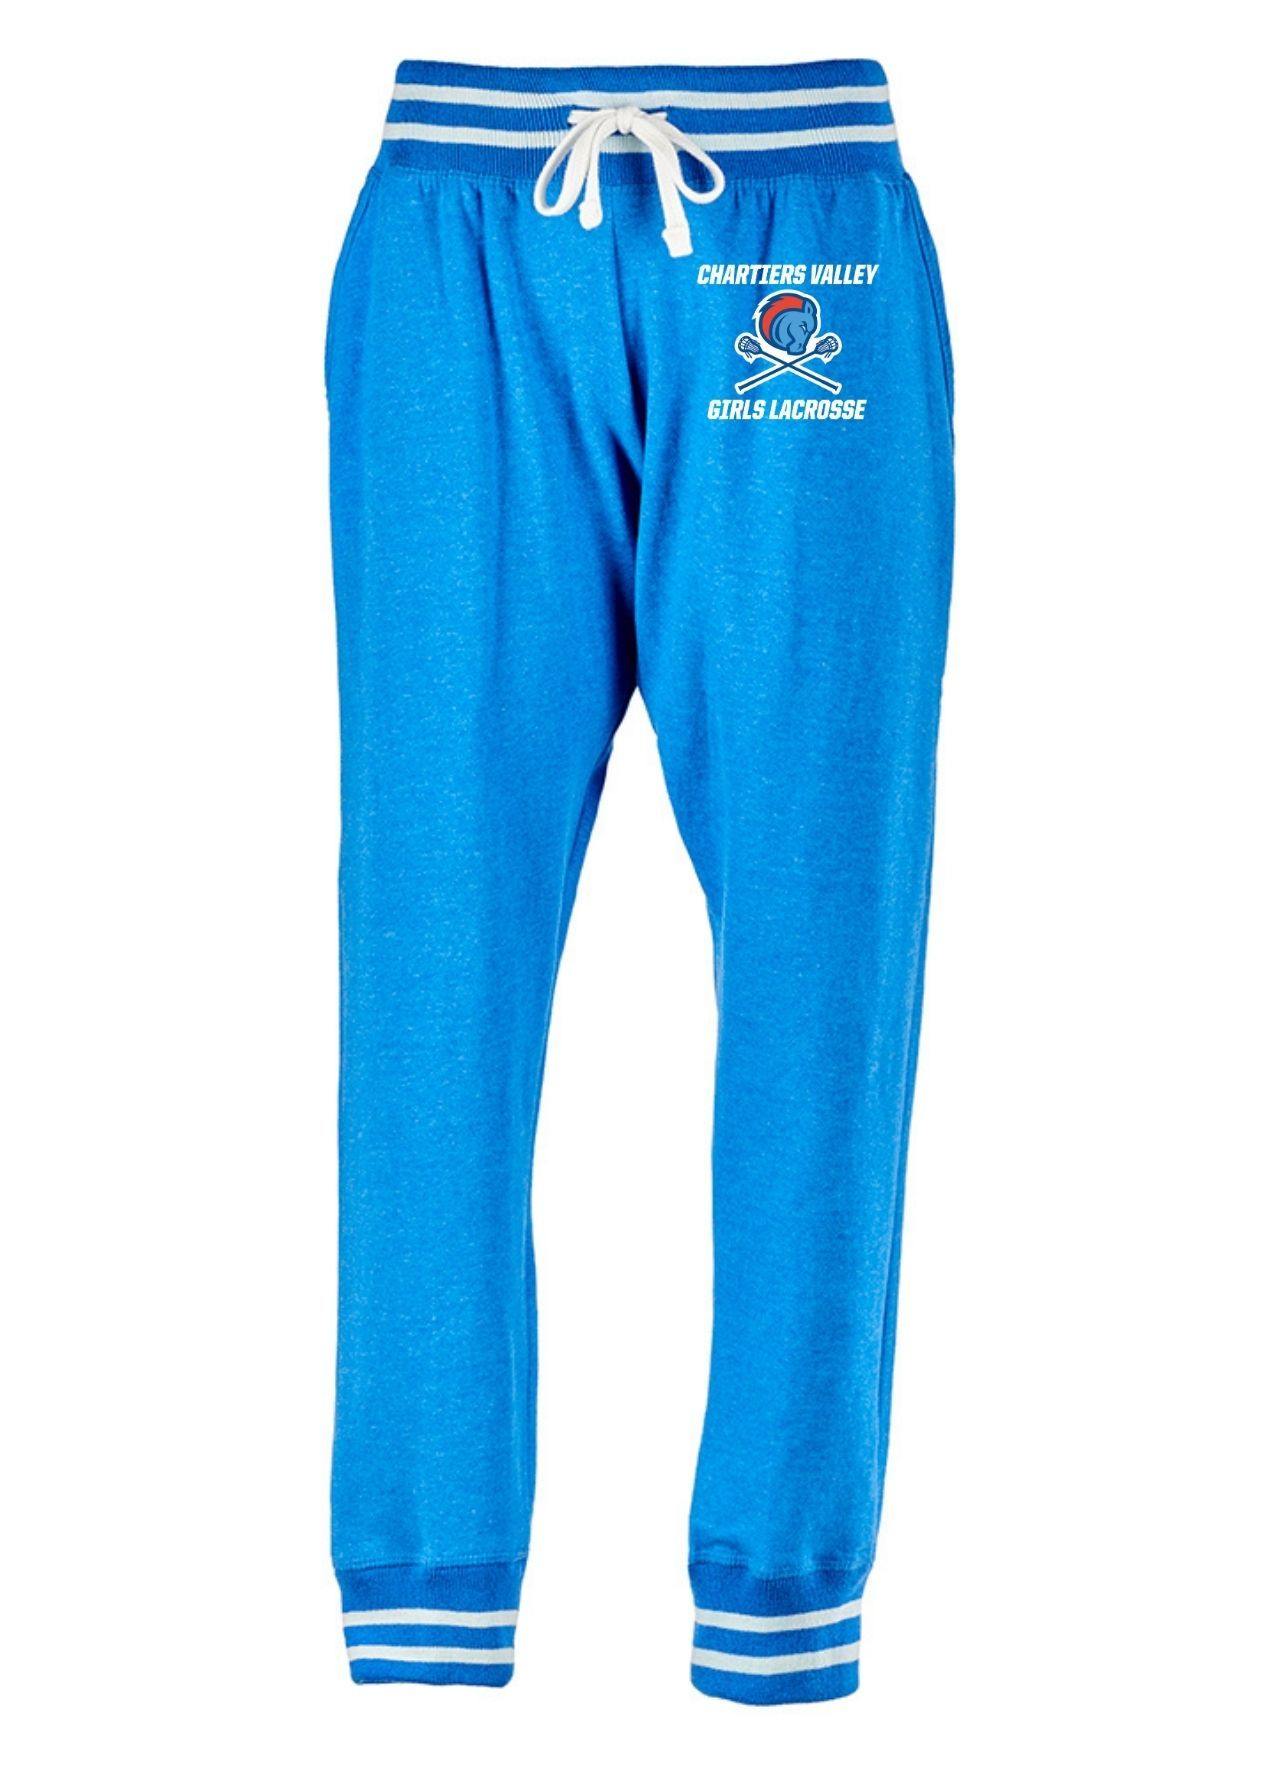 Chartiers Valley Girls J. America - Women’s Relay Joggers - Royal